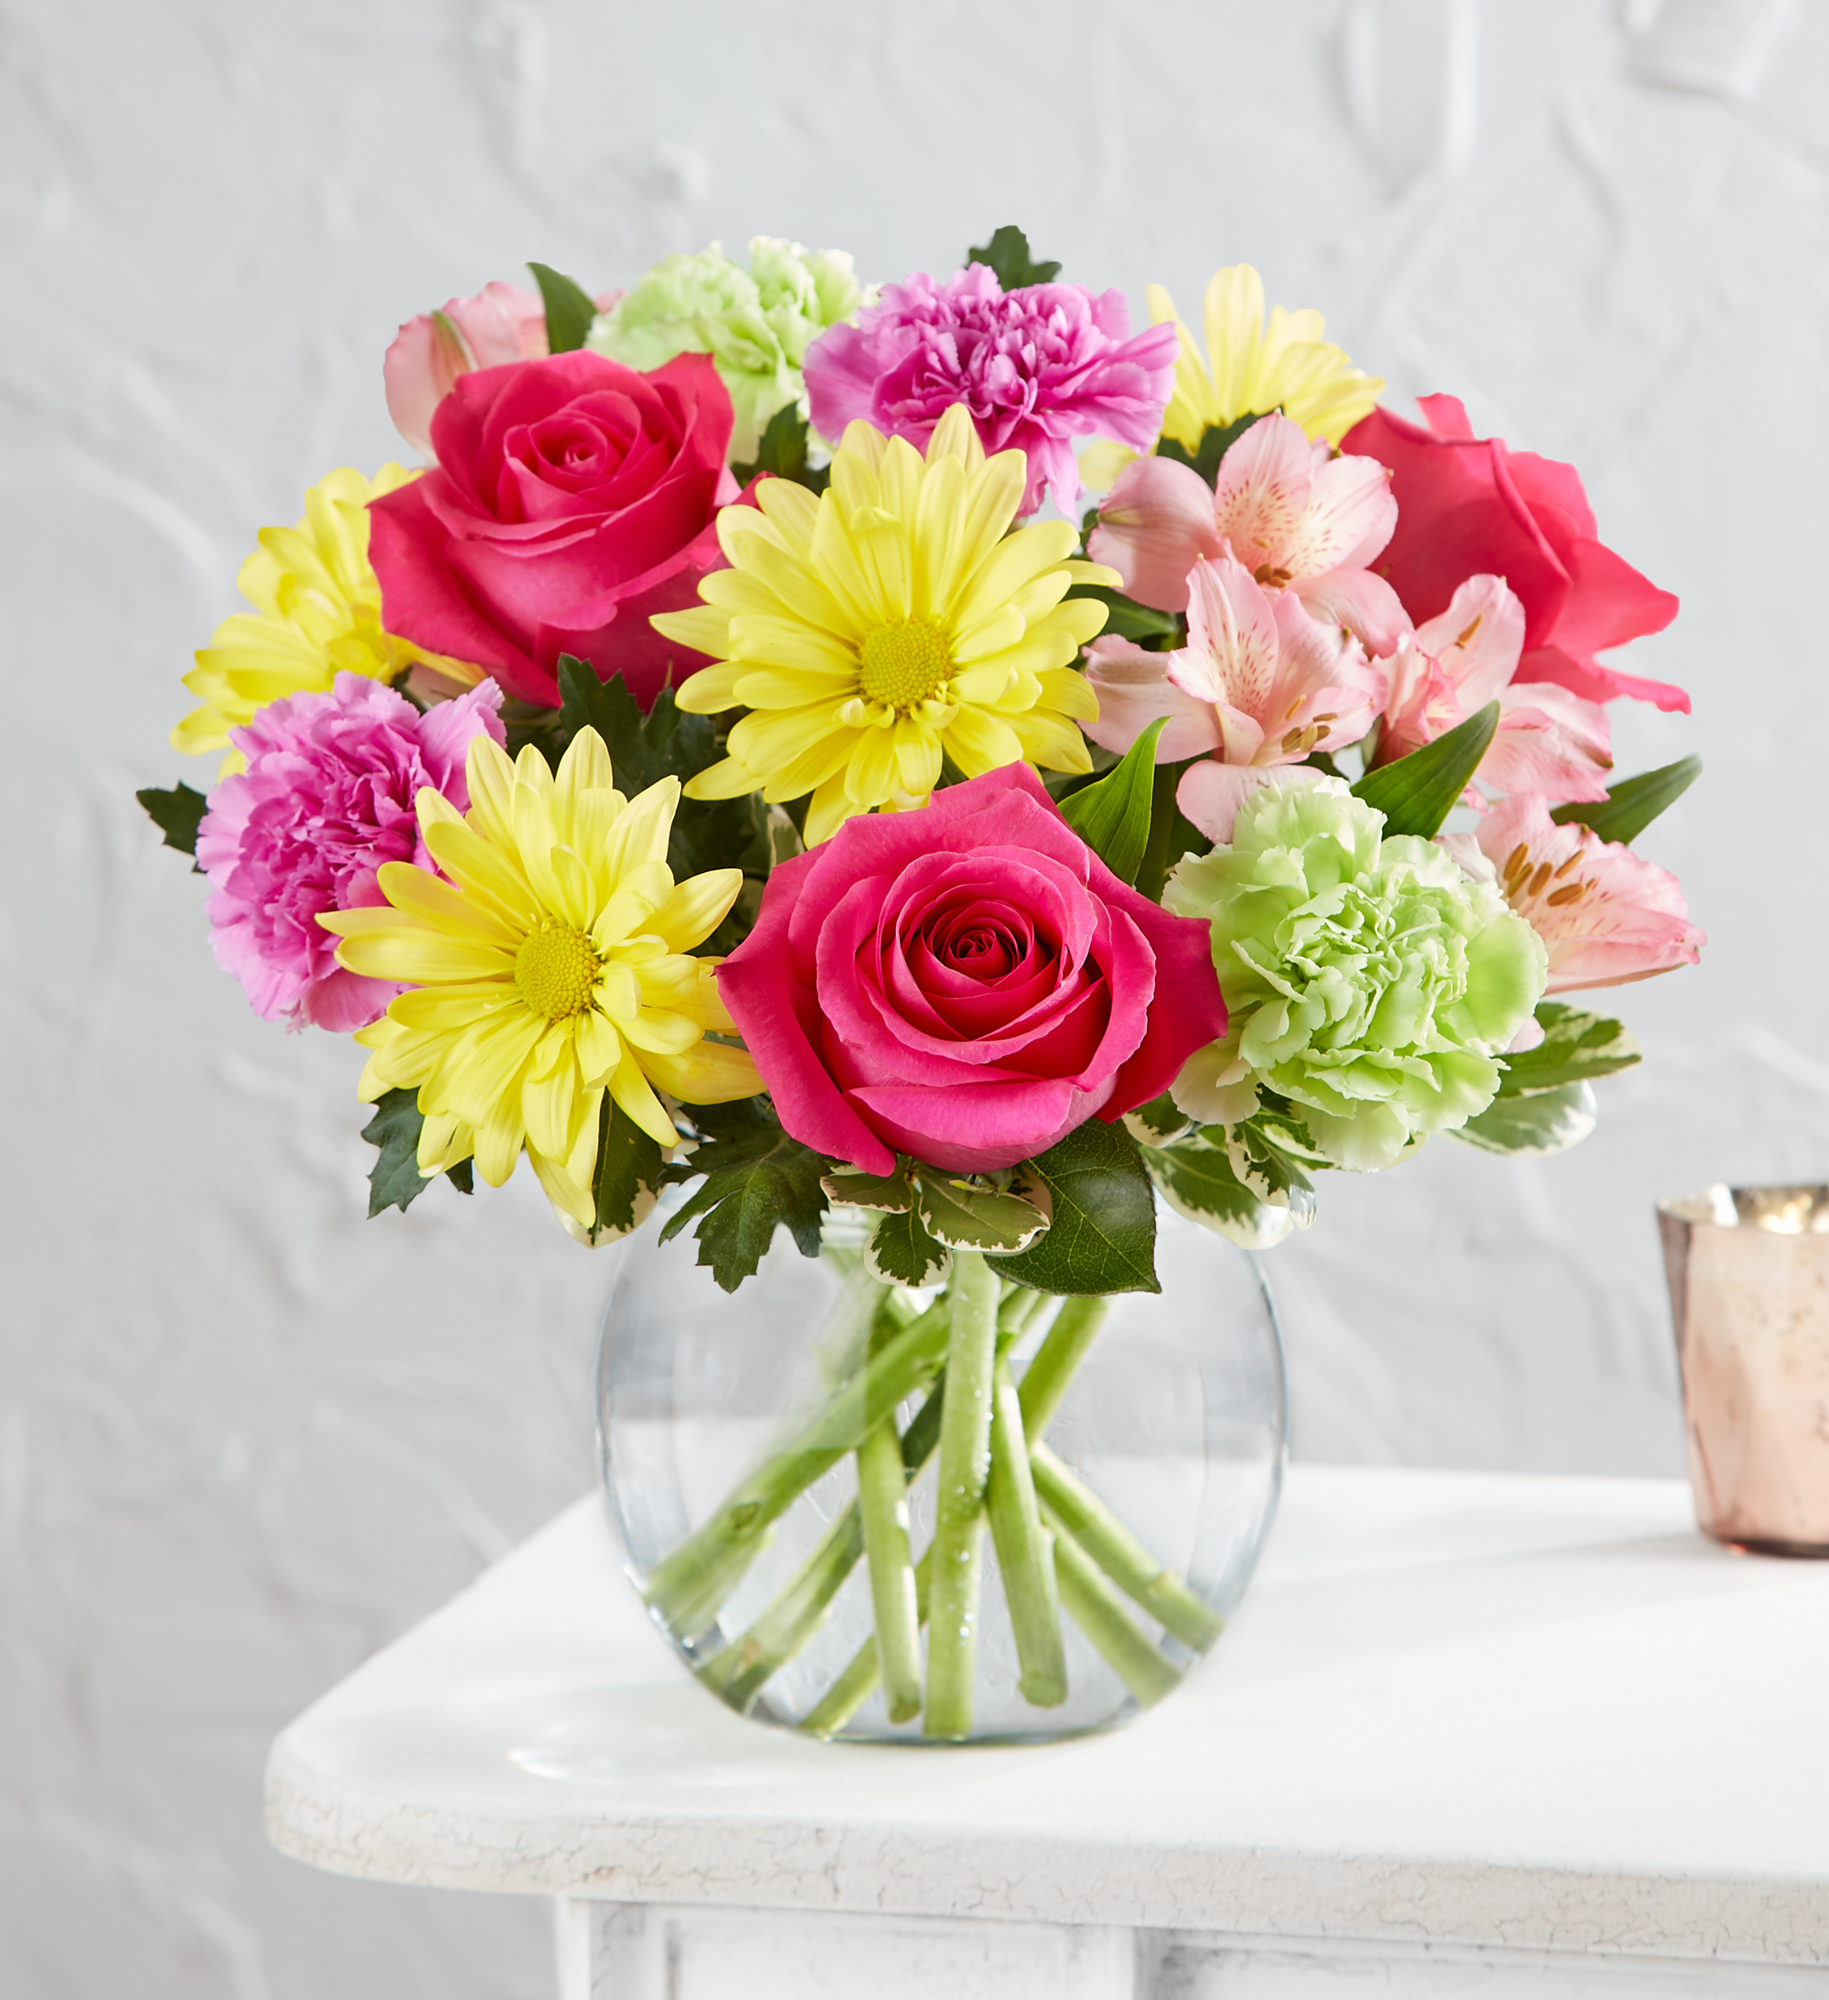 The bouquet for Mother’s Day designed by Ashlee Roberson is called Vibrant Gem. Courtesy photo